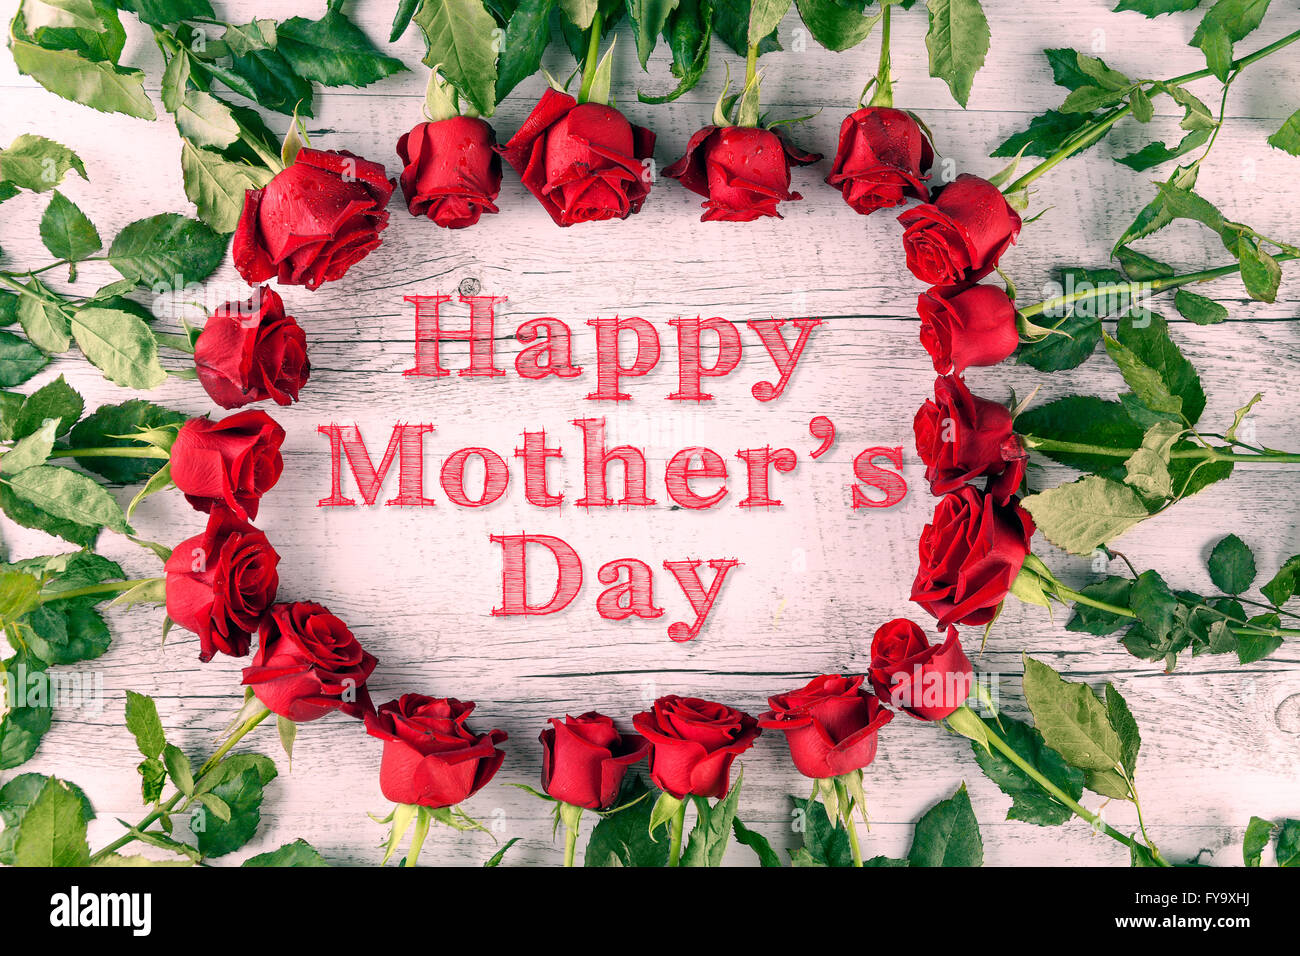 https://c8.alamy.com/comp/FY9XHJ/happy-mothers-day-text-in-a-circle-of-red-roses-on-wooden-table-top-FY9XHJ.jpg